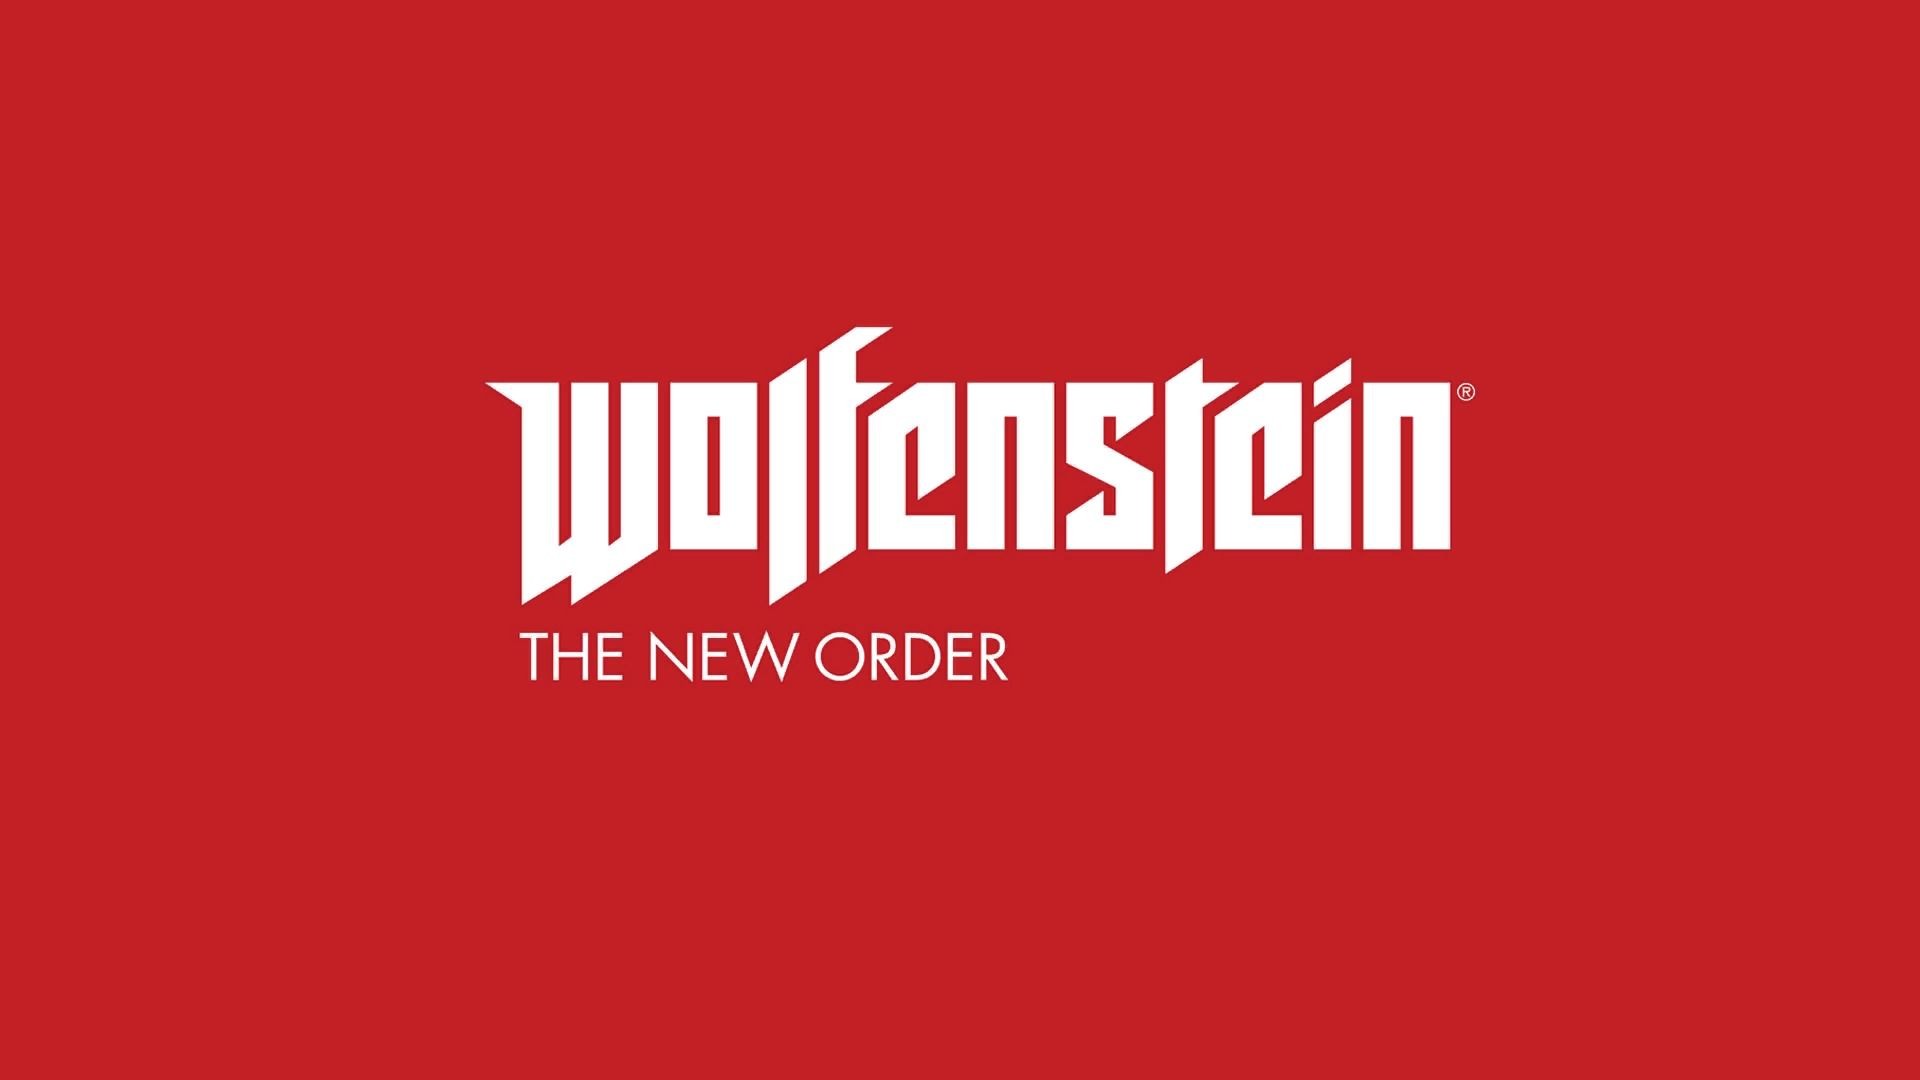 Have you new order. Wolfenstein: the New order. Wolfenstein II the New order. Wolfenstein логотип. Wolfenstein the New order лого.